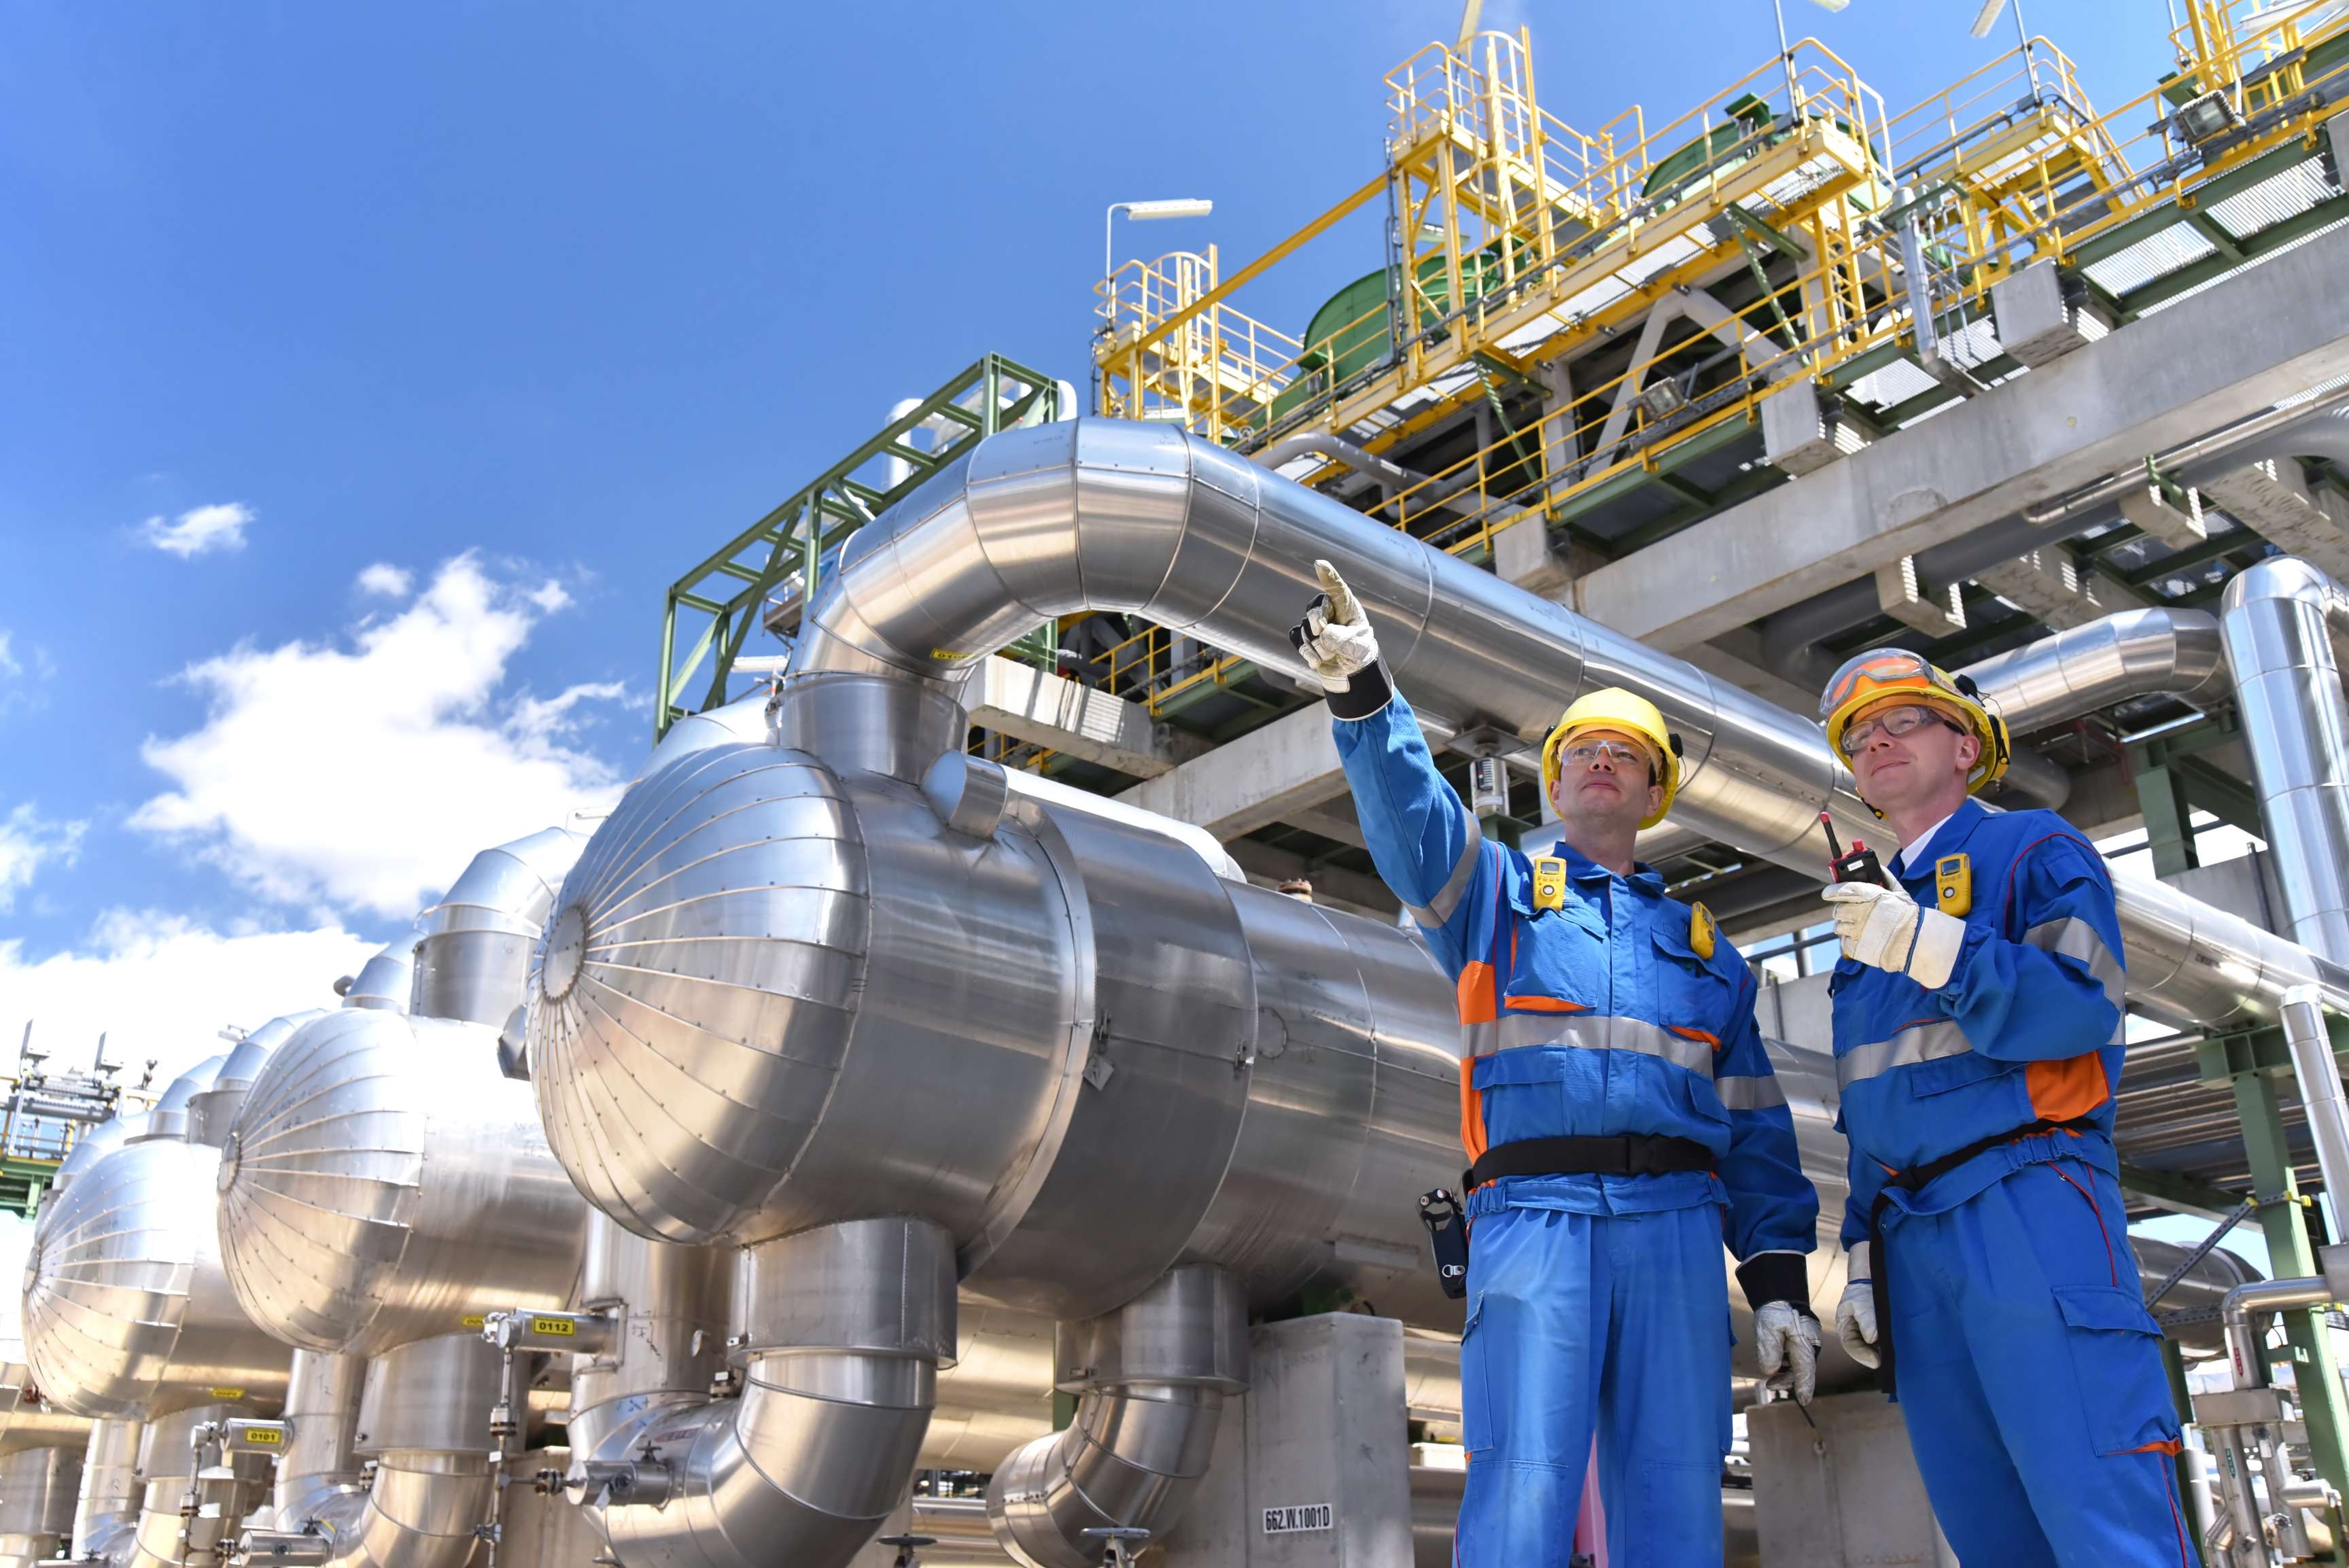 Two experts in front of a piping system and a pressure vessel, one of them pointing in one direction, the other holding a walkie-talkie.